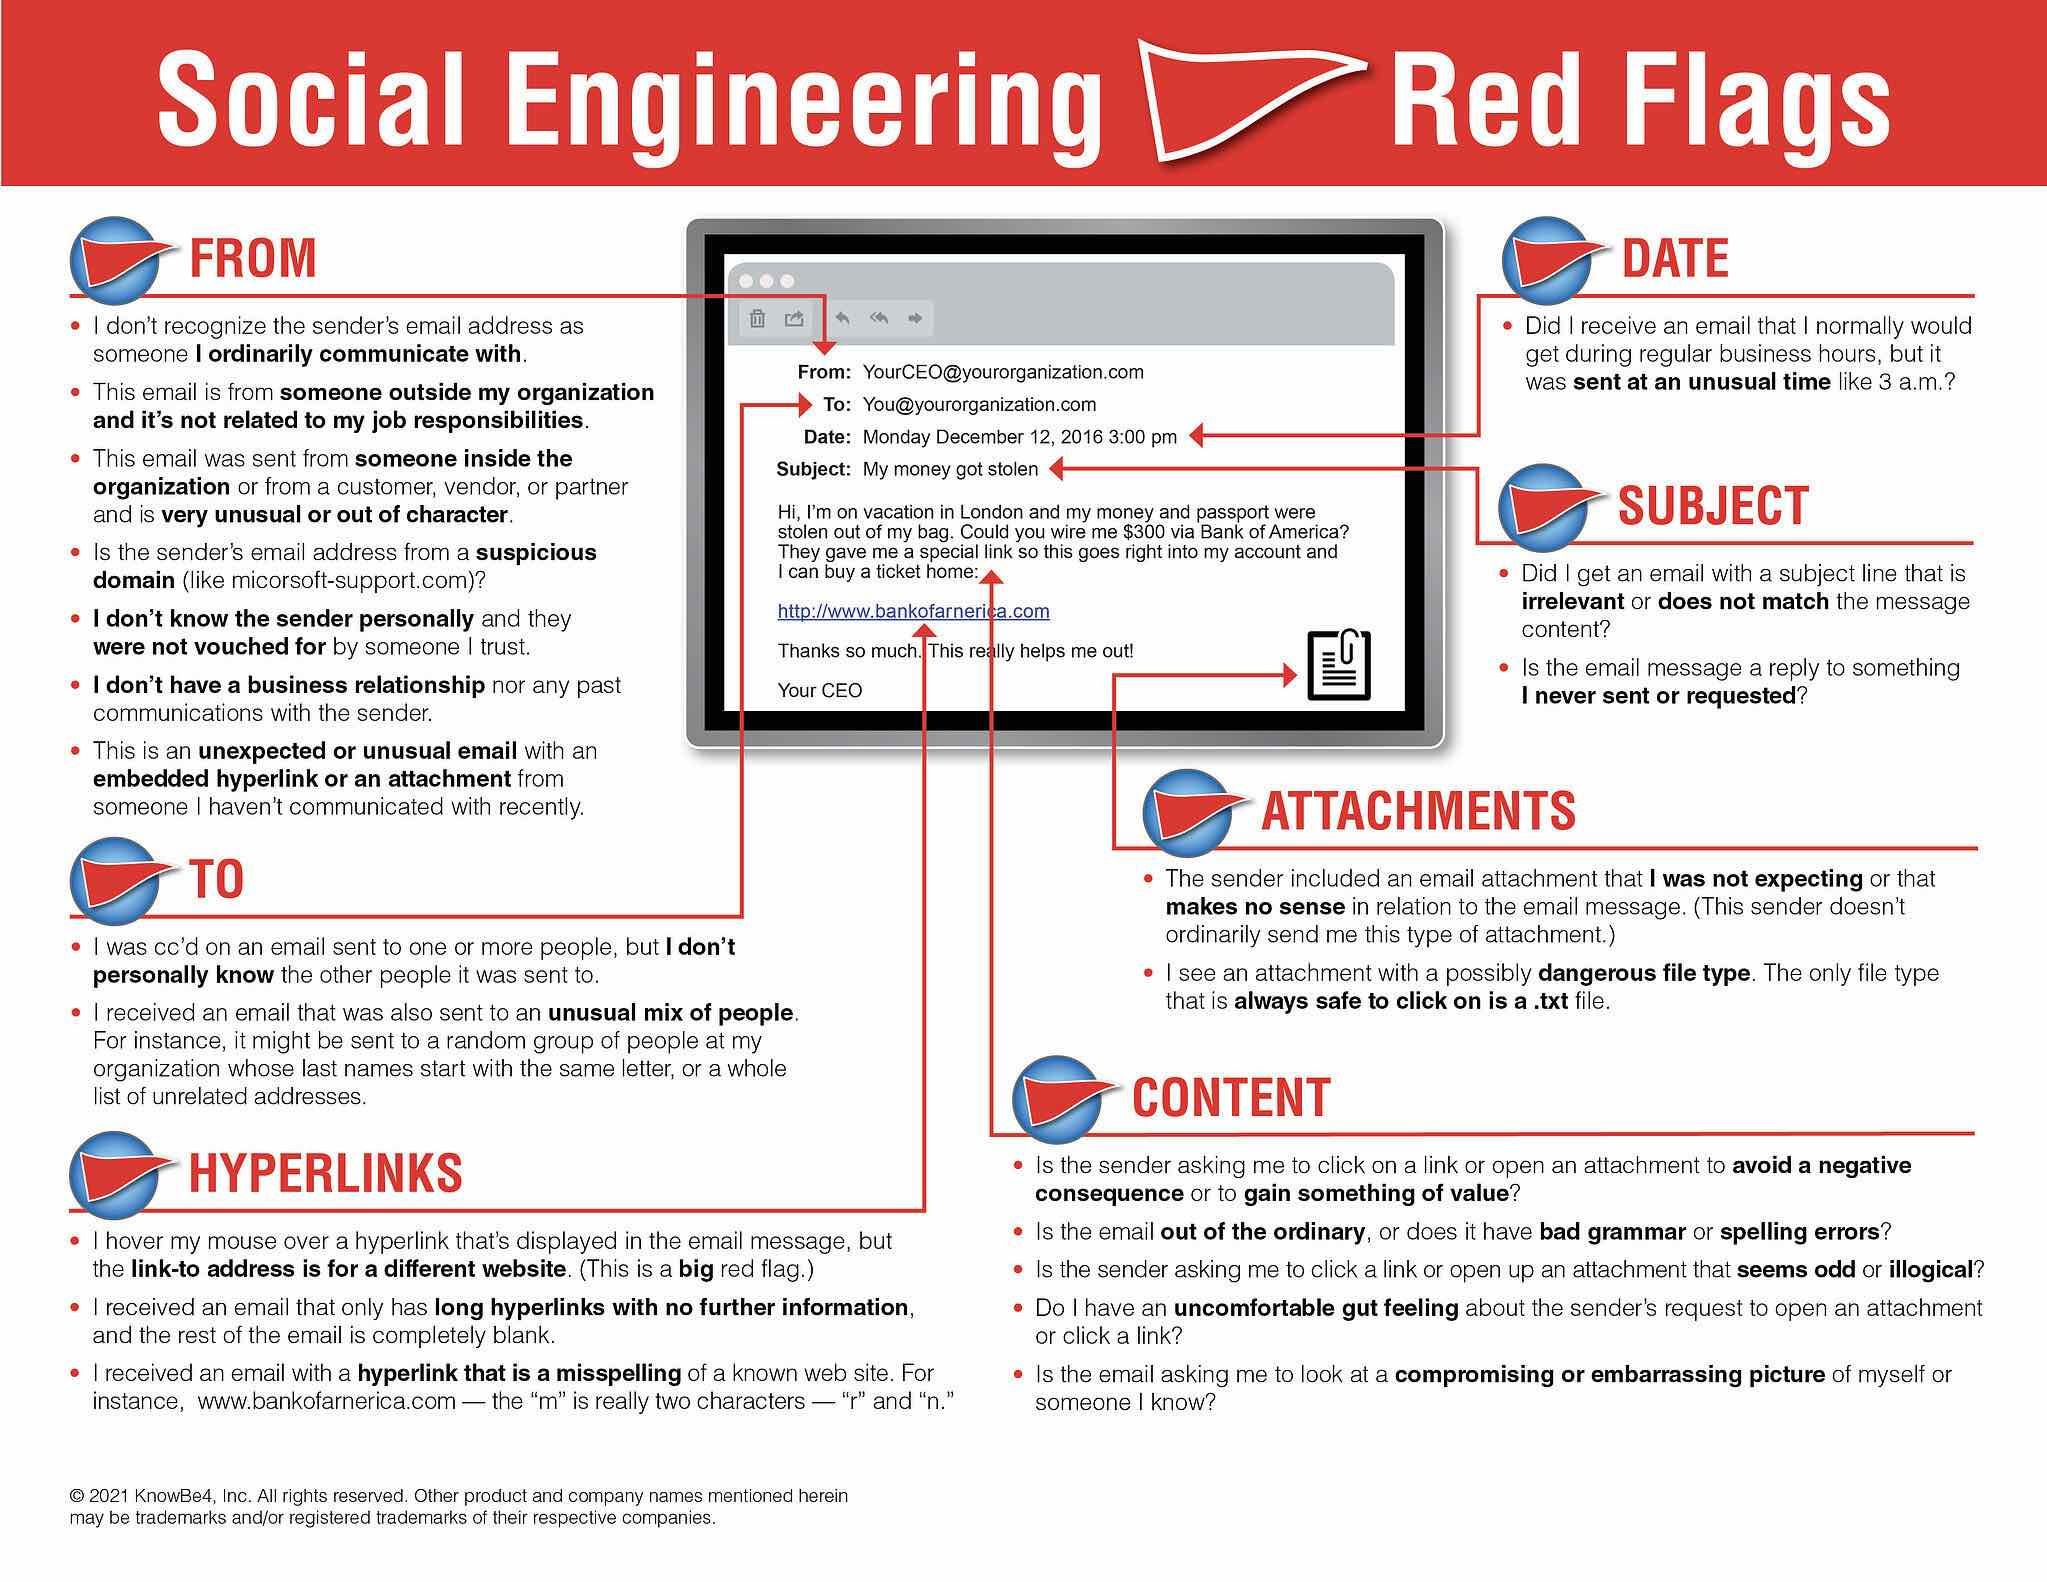 How to spot a Social Engineering attack